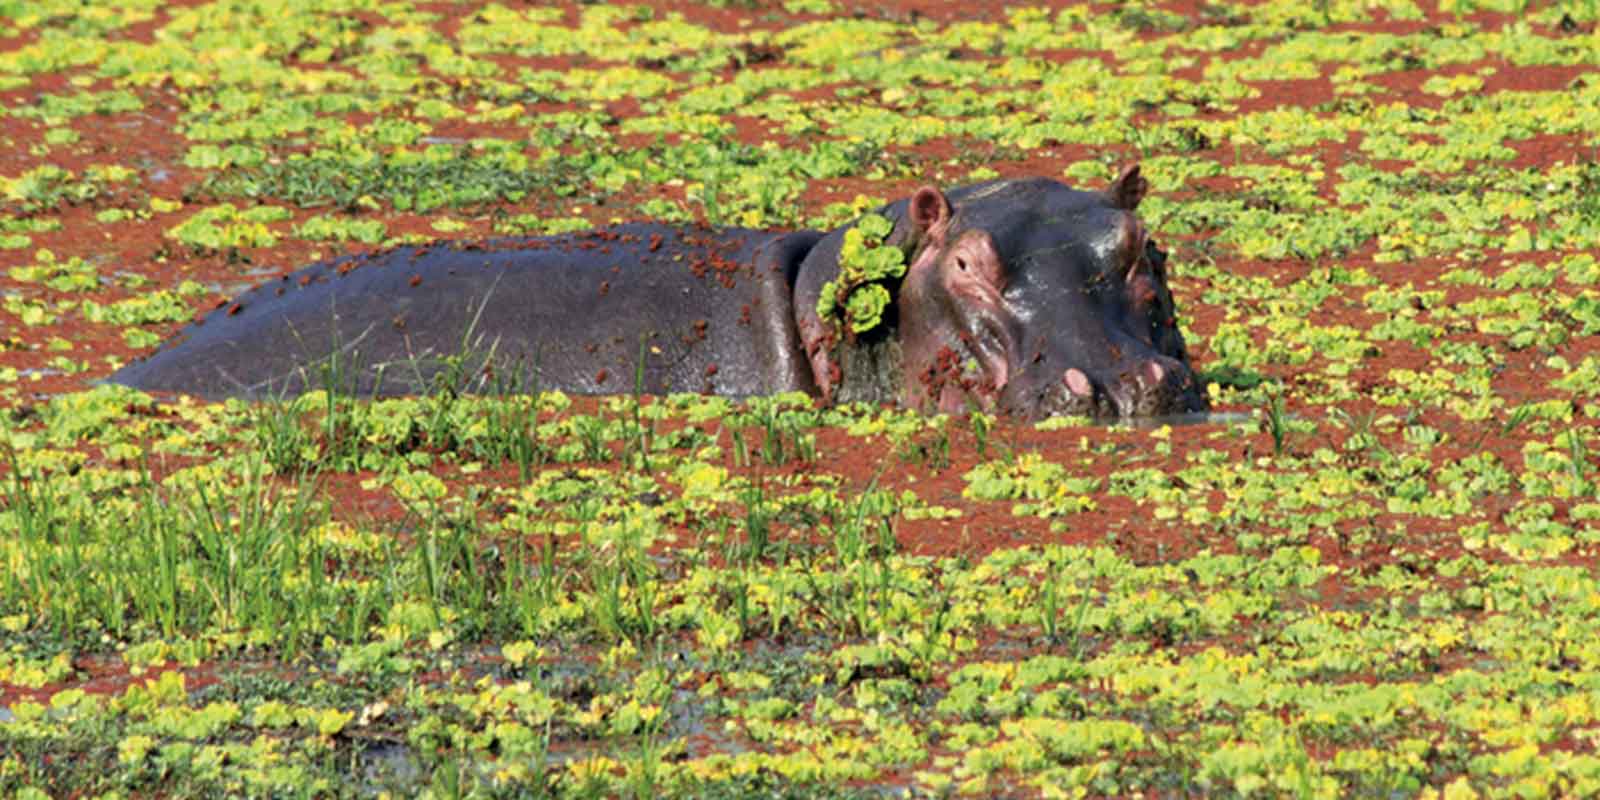 Hippo partially submerged in green swamp in Zambia